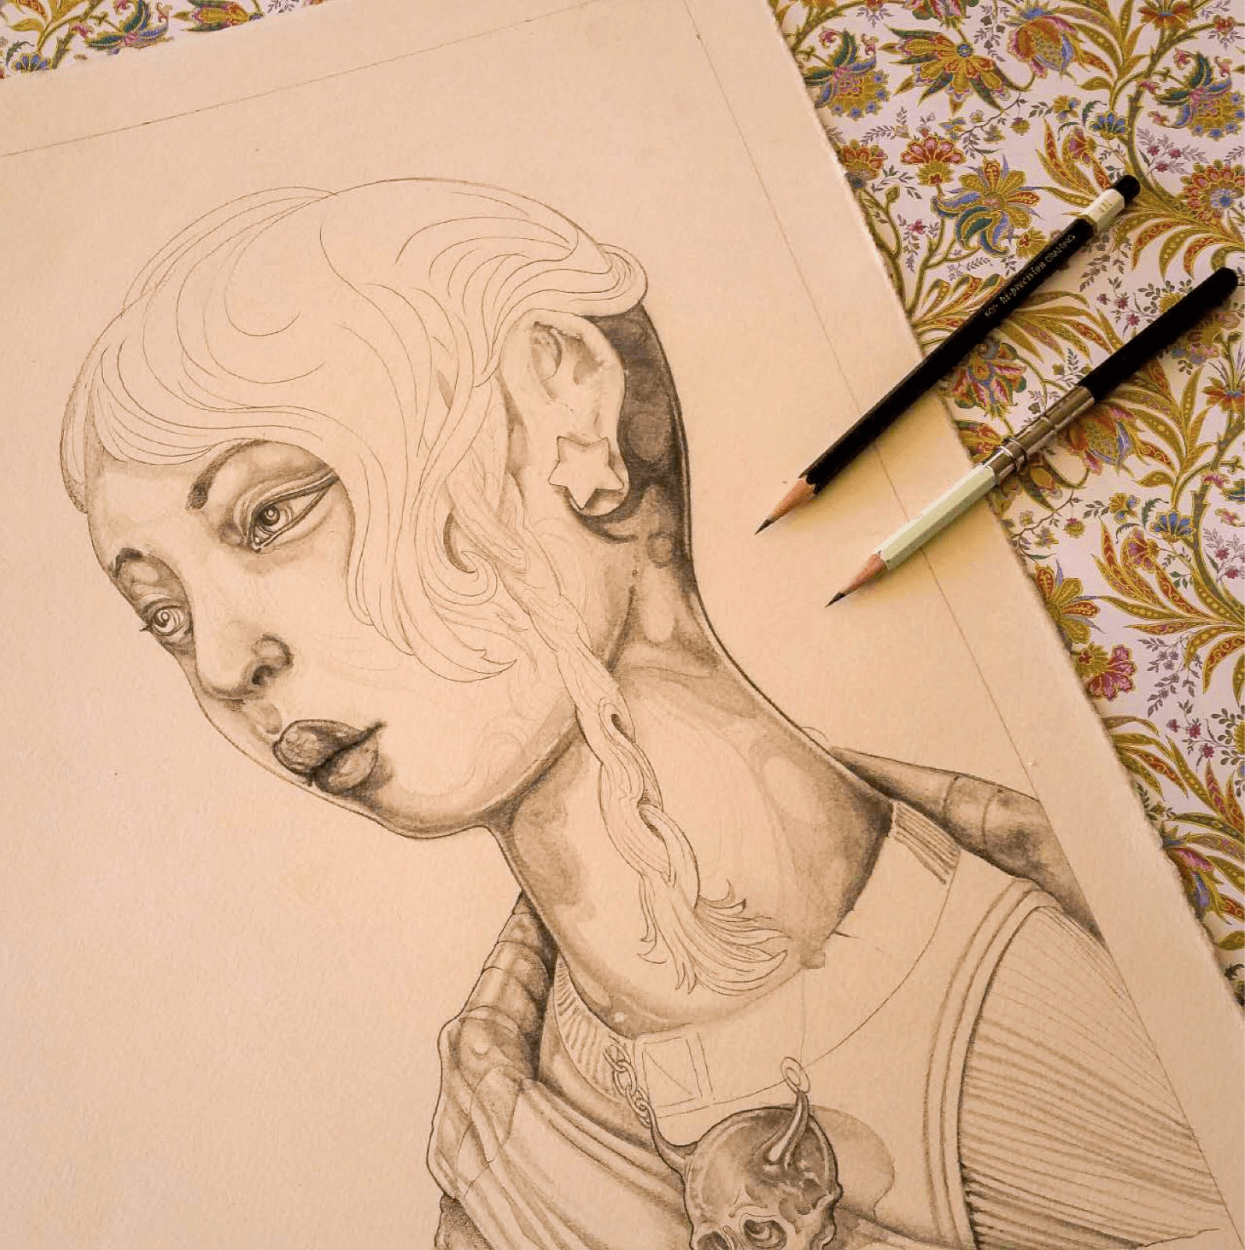 Sketch of Kali's portrait, pale and not fully colored, sitting on an ornate tablecloth with two pencils.